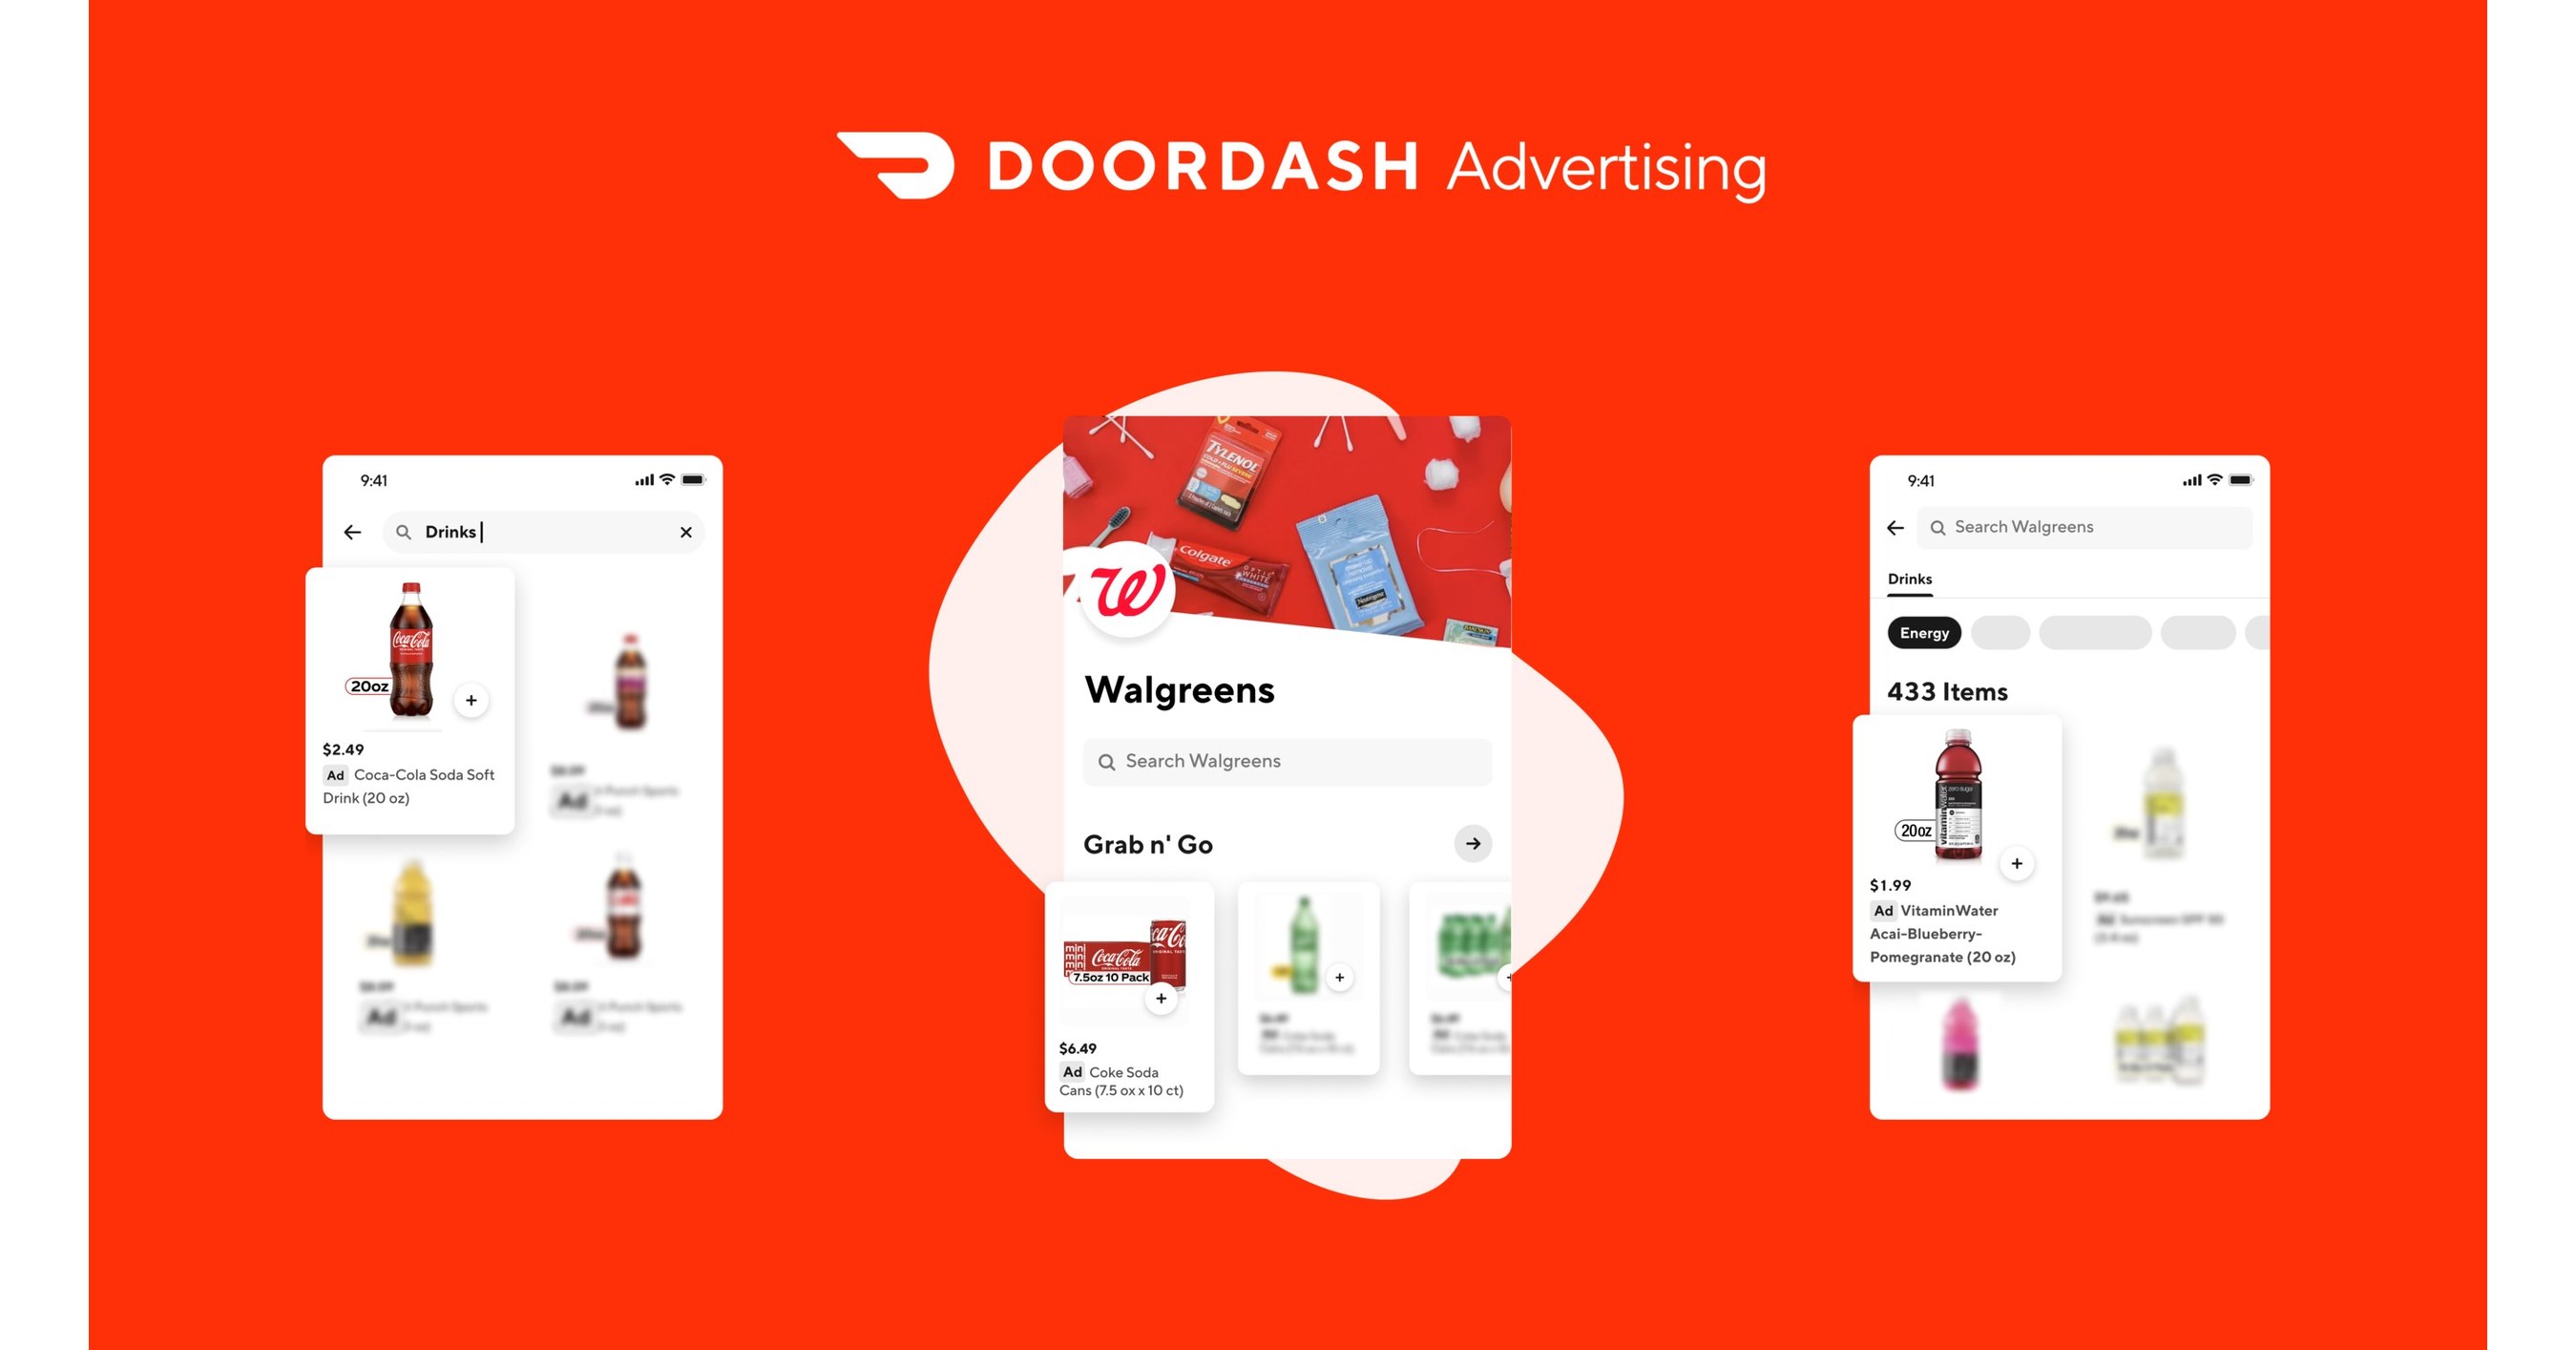 How To Become a DoorDash Driver in Australia?  Study in Australia -  Information Website for International Students - Overseas Students Australia